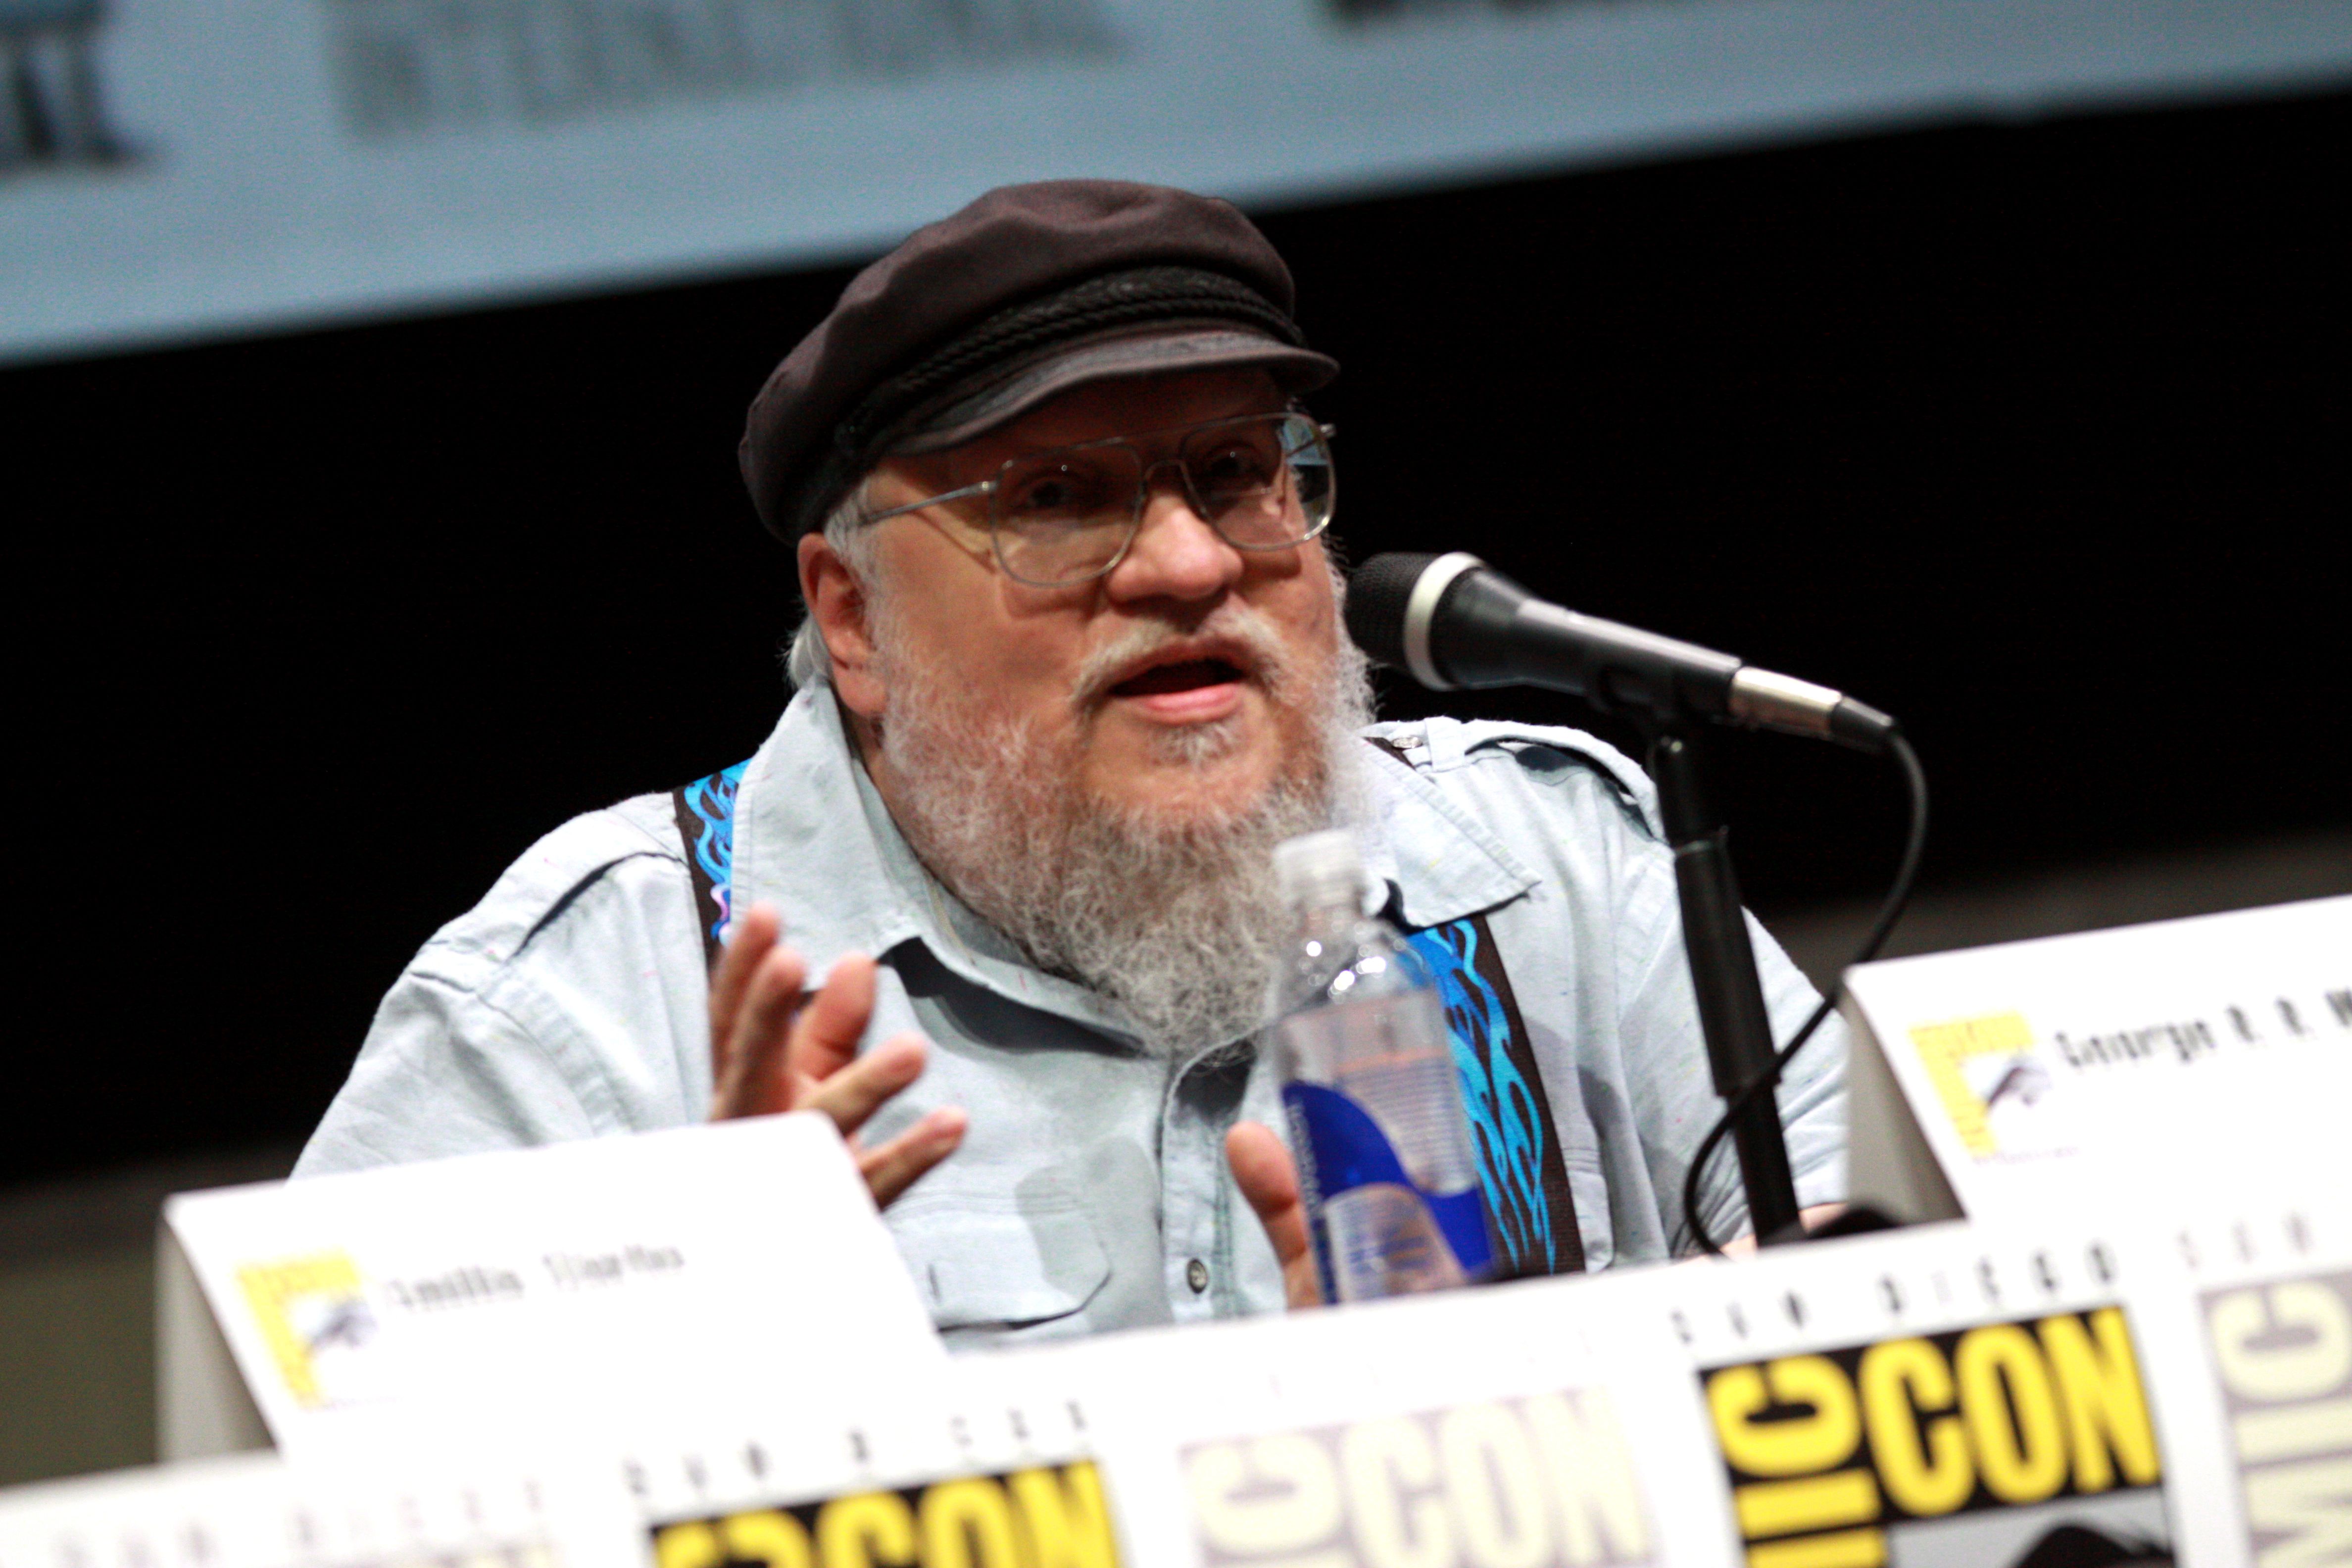 game of thrones author george rr martin working with hbo again on all new tv show image 1